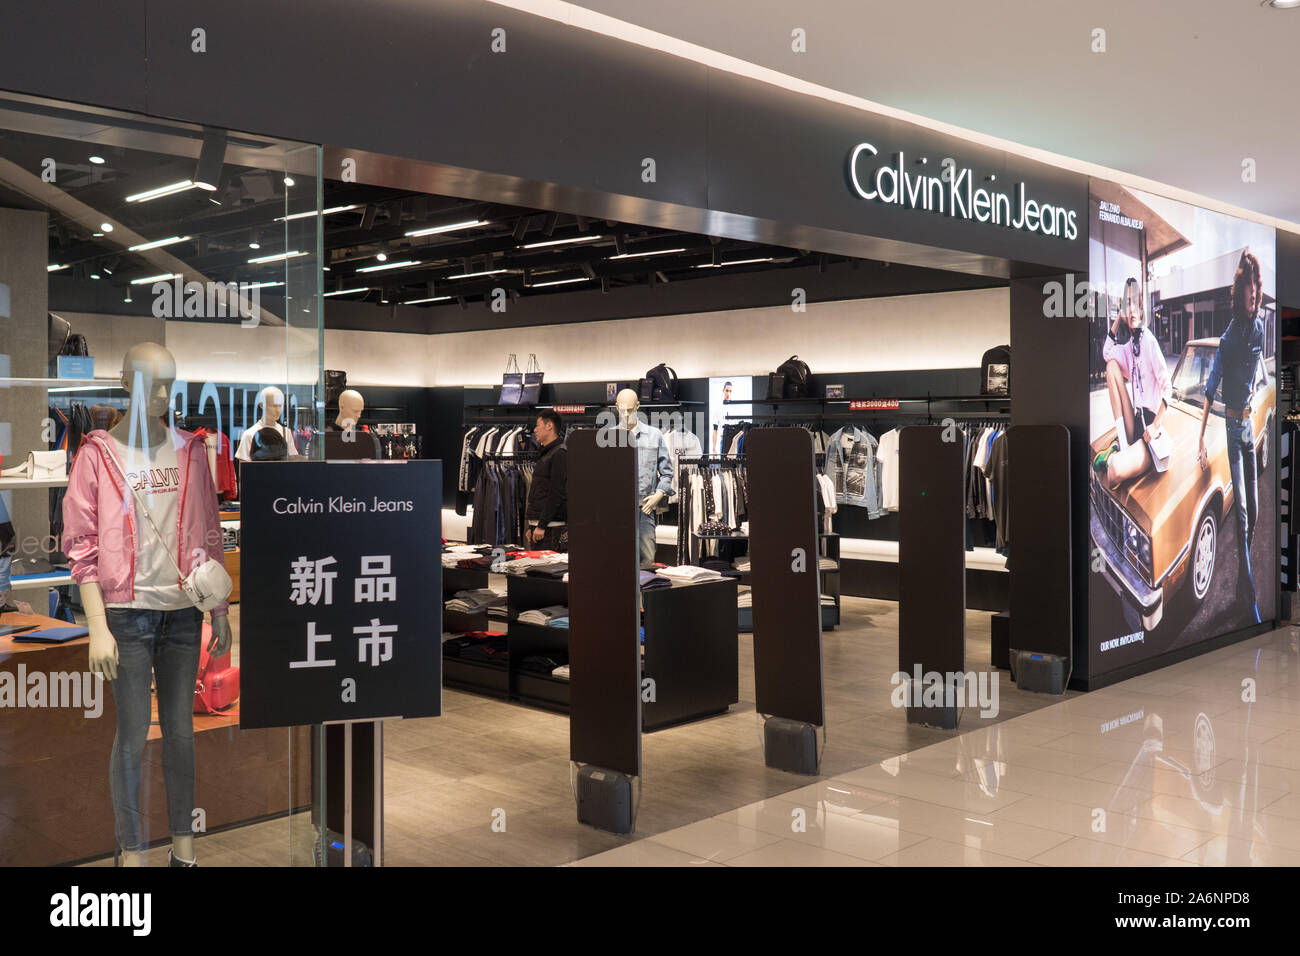 Calvin Klein Store Front in Chinese Shopping mall, Dalian, China, 8 April  2019 Stock Photo - Alamy